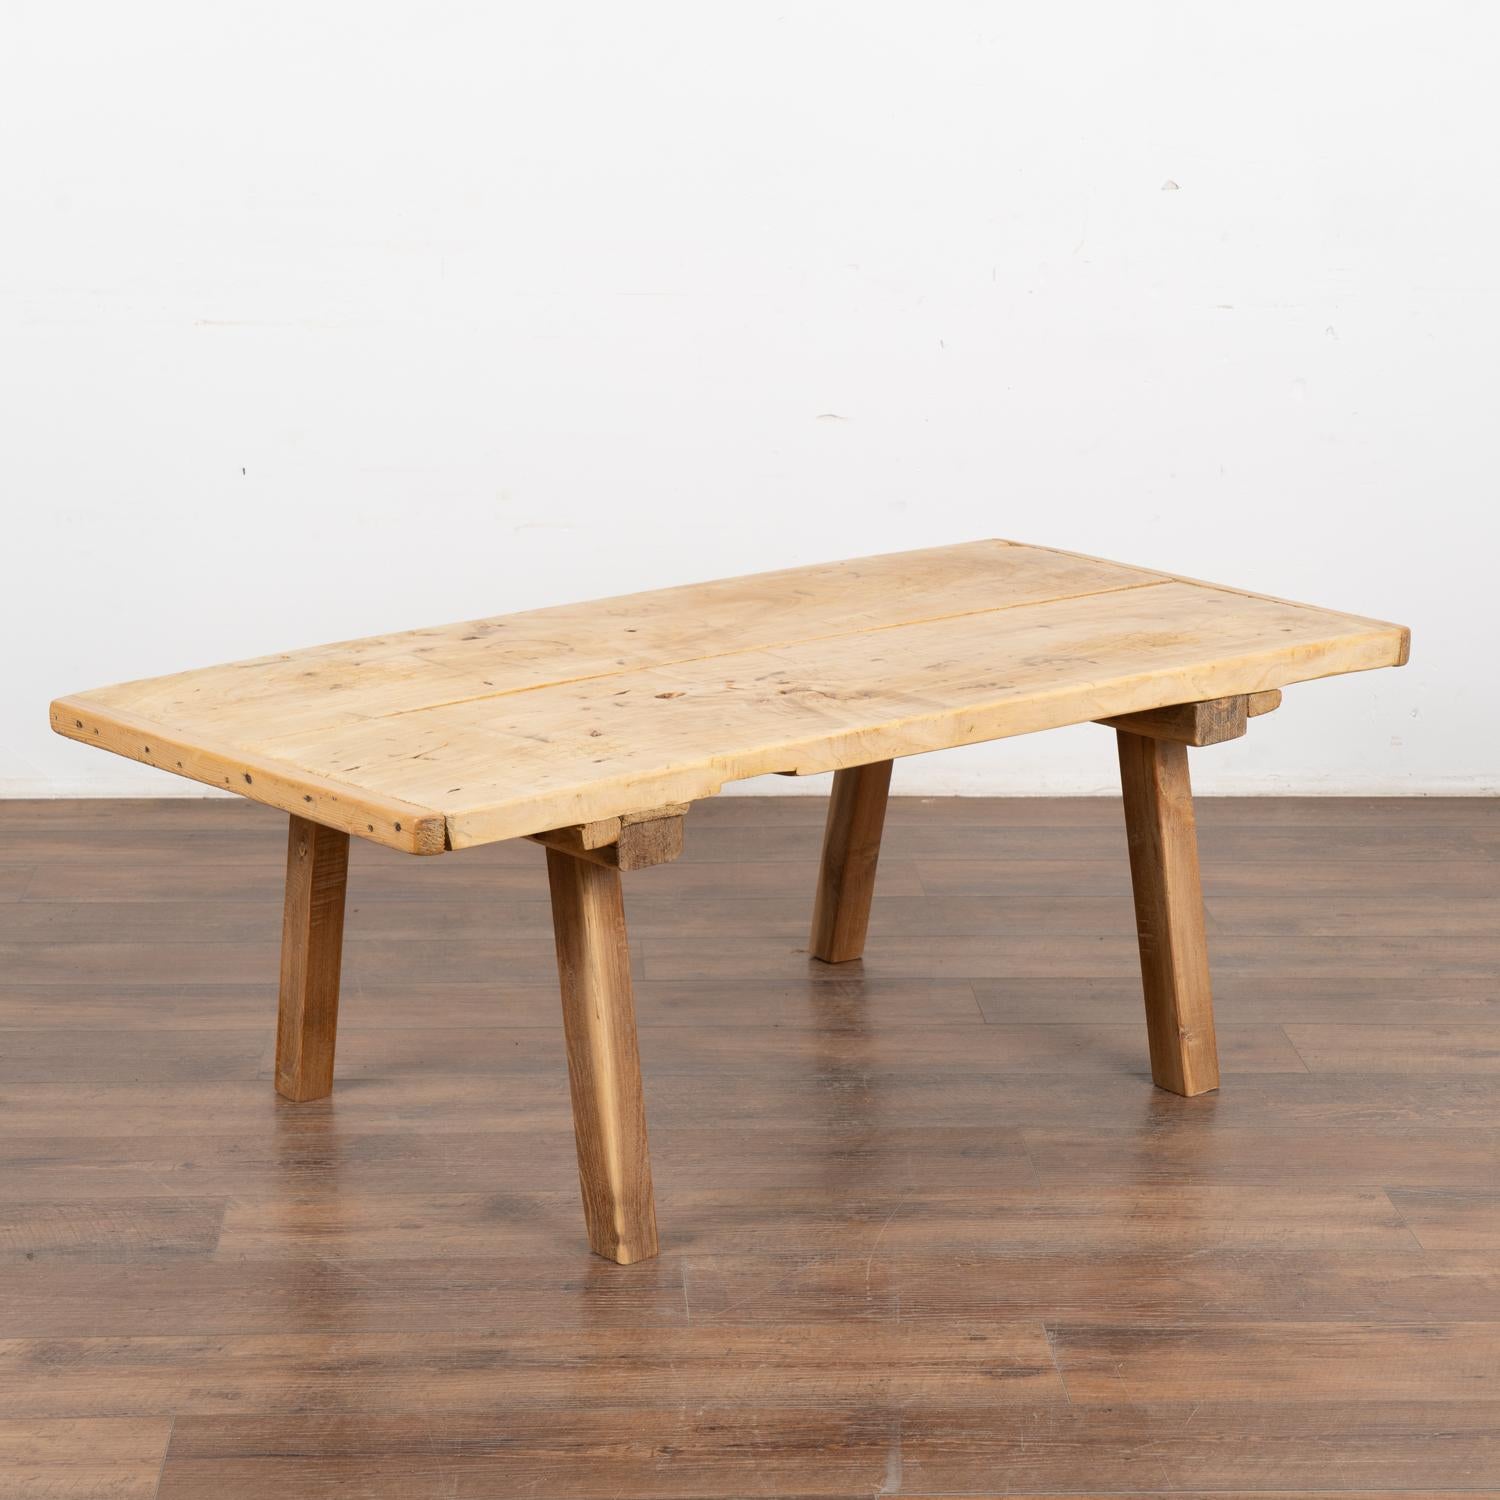 The appeal of this coffee table comes from the rustic wood top that originally served as a work table and rests on original peg legs. 
Note the scratches, nicks, gouges, stains, aged separation of wood and old cracks that all combine to build the